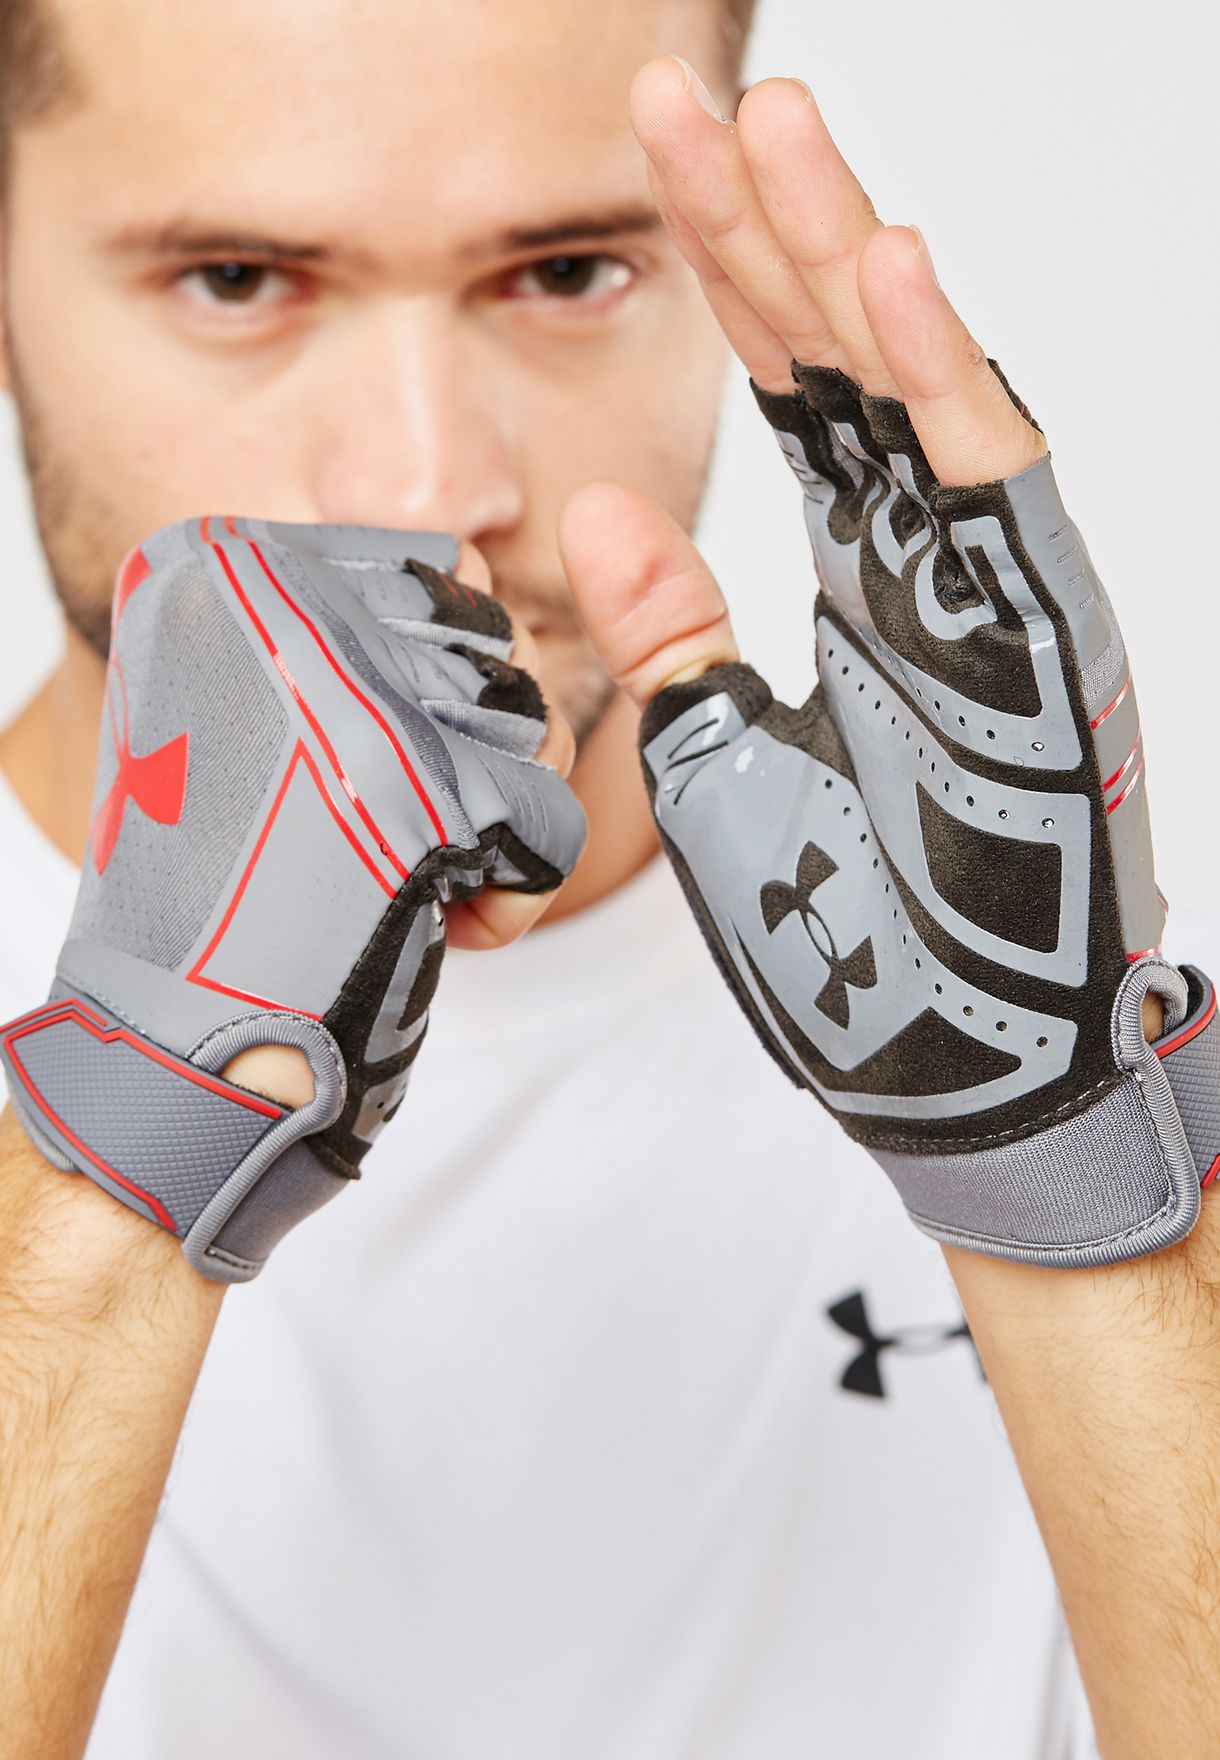 under armour men's coolswitch flux gloves